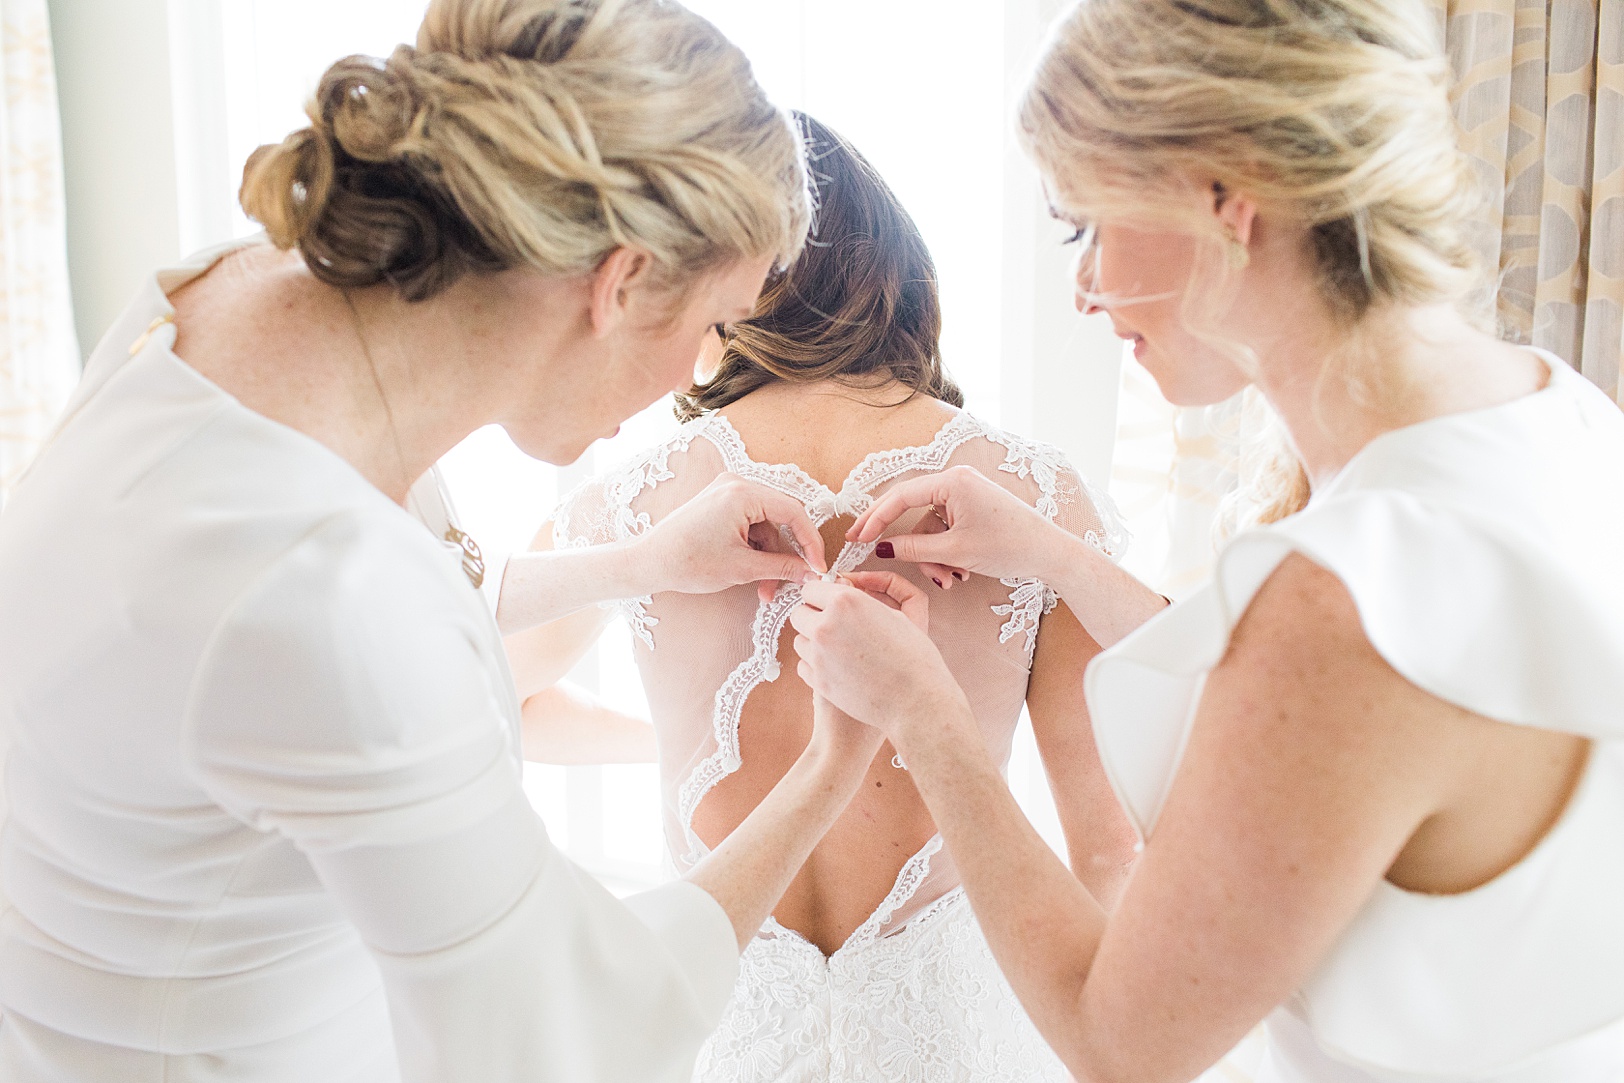 Bride's Sisters buttoning up her wedding dress | Kaitlin Scott Photography